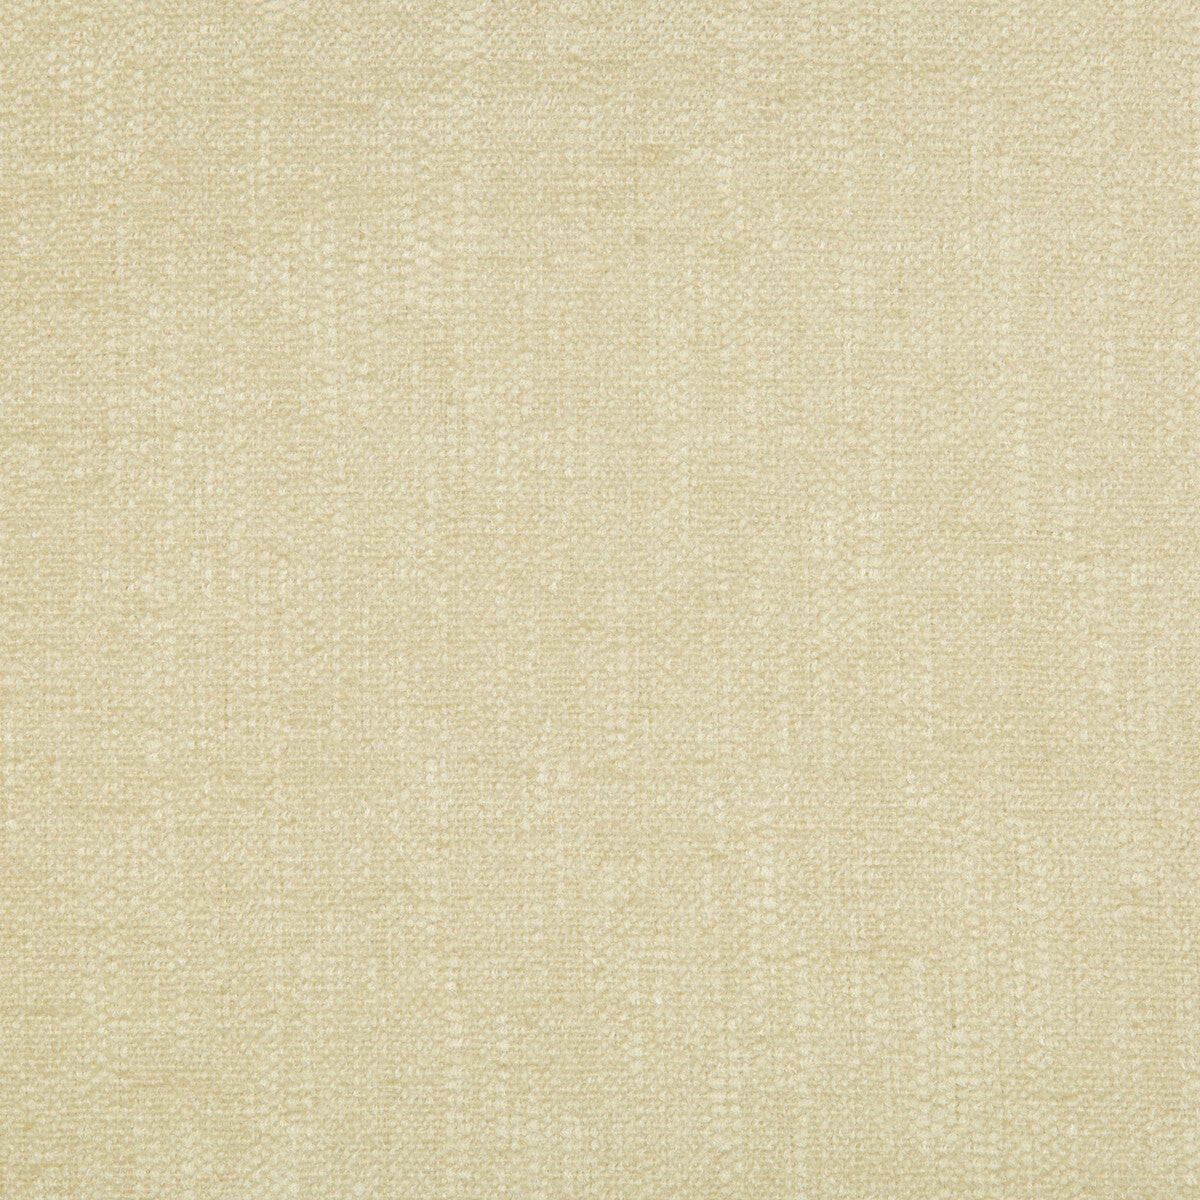 Kravet Contract fabric in 34636-116 color - pattern 34636.116.0 - by Kravet Contract in the Crypton Incase collection